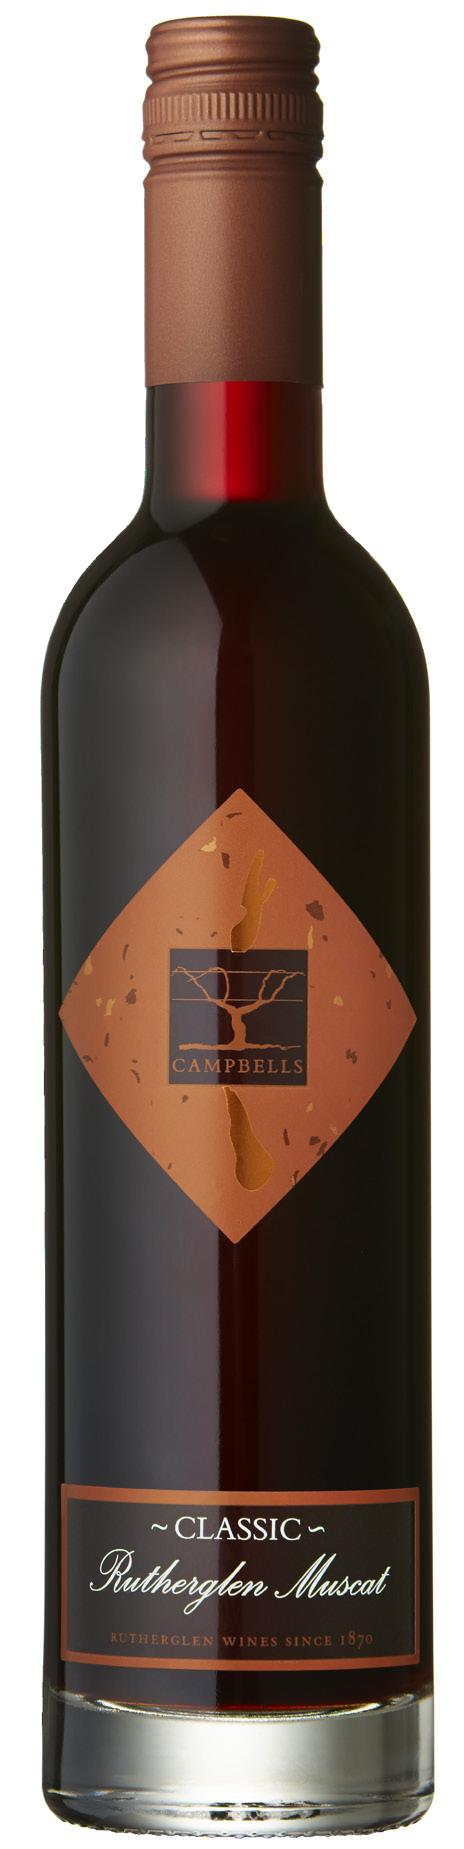 CLASSIC RUTHERGLEN MUSCAT - 500ml CLASSIFICATION: CLASSIC This classification is a maturing style imparting greater levels of richness and complexity; exhibiting the beginnings of the distinctive dry